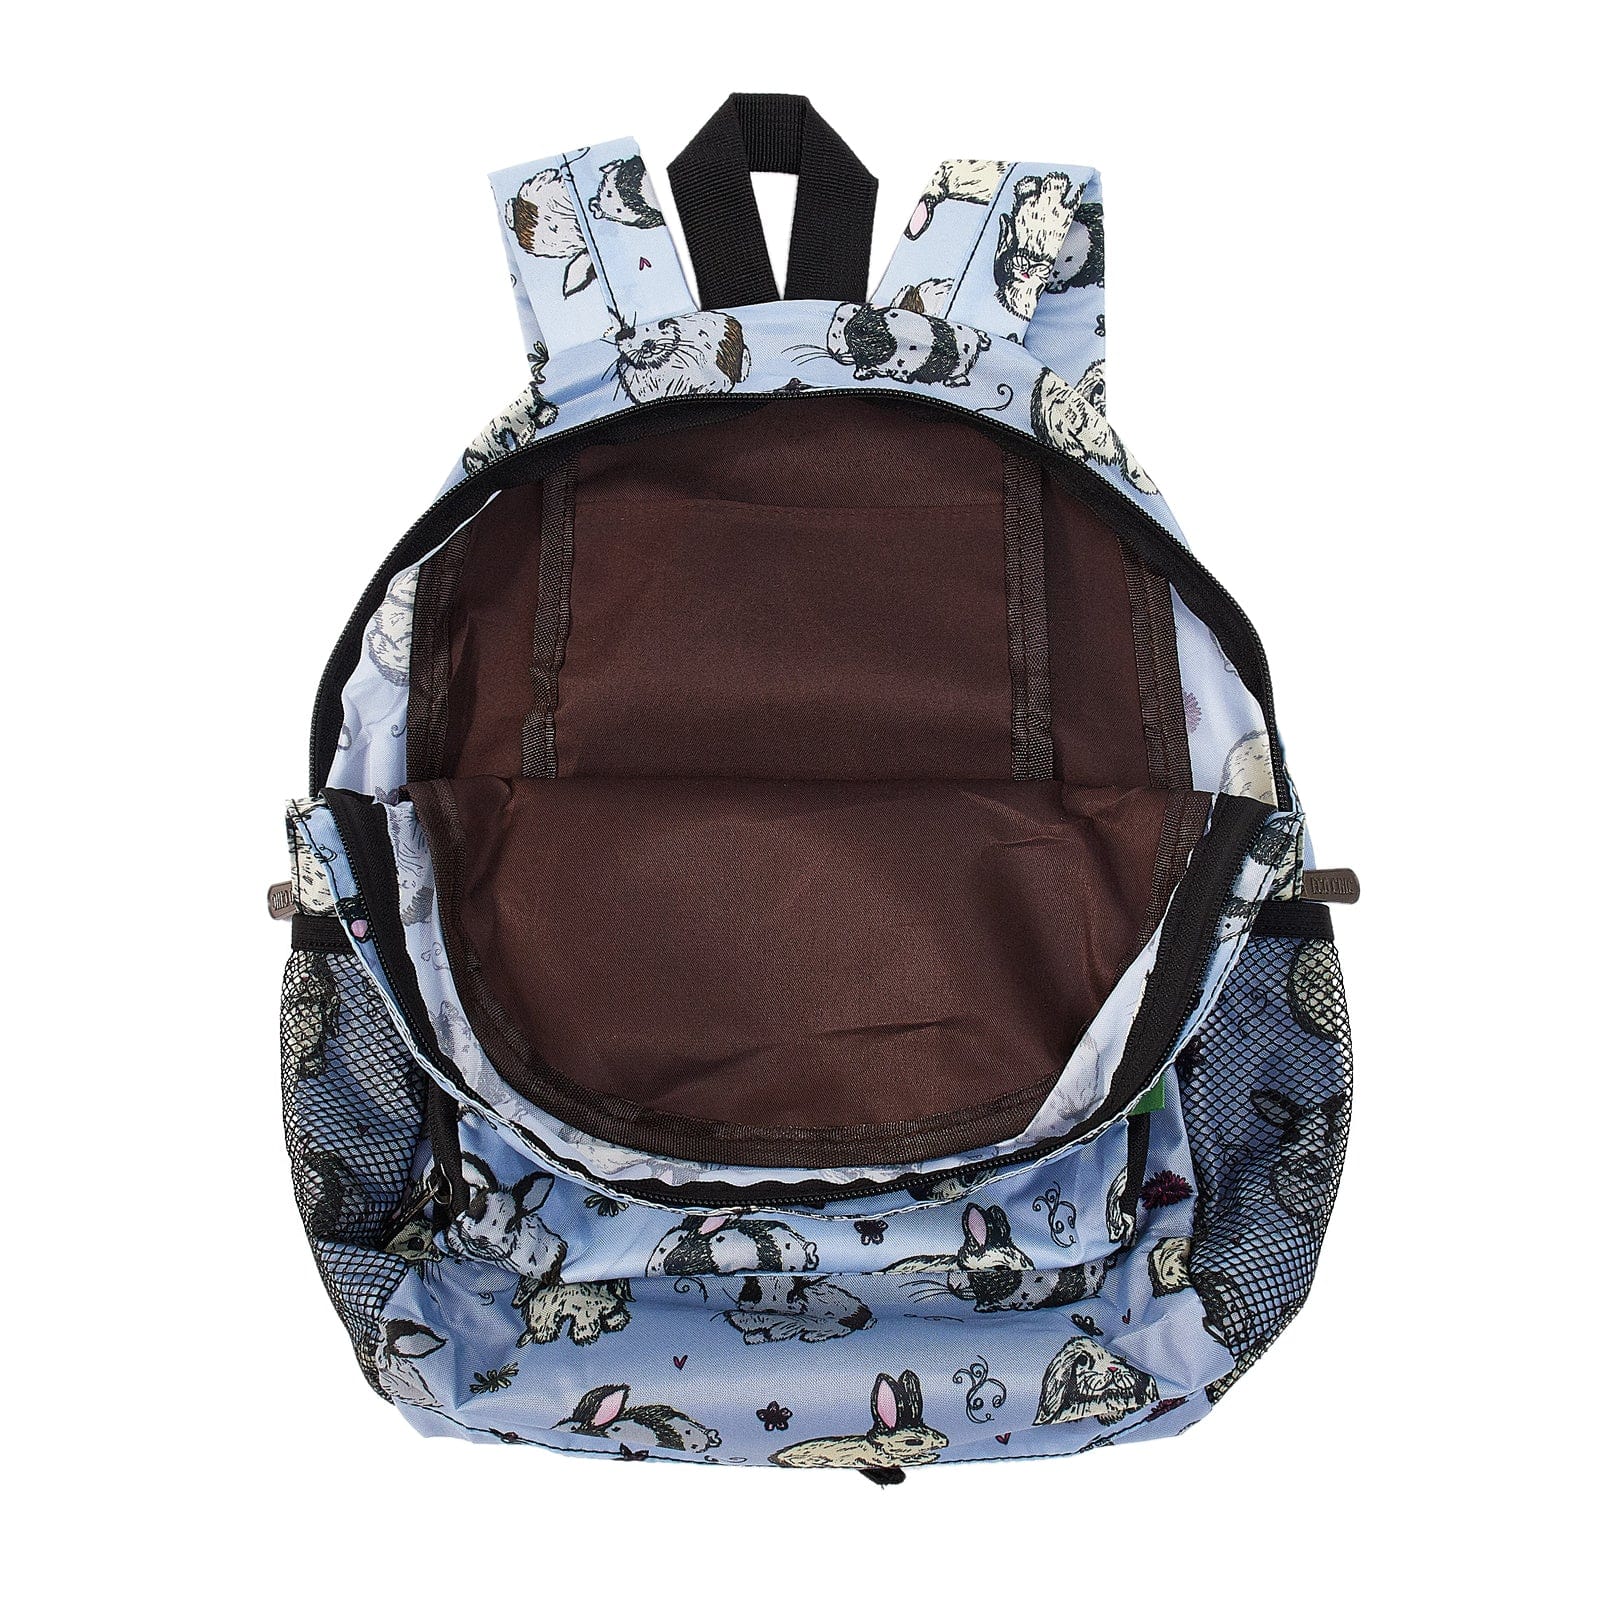 Eco Chic Baby Blue Eco Chic Lightweight Foldable Mini Backpack Bunny